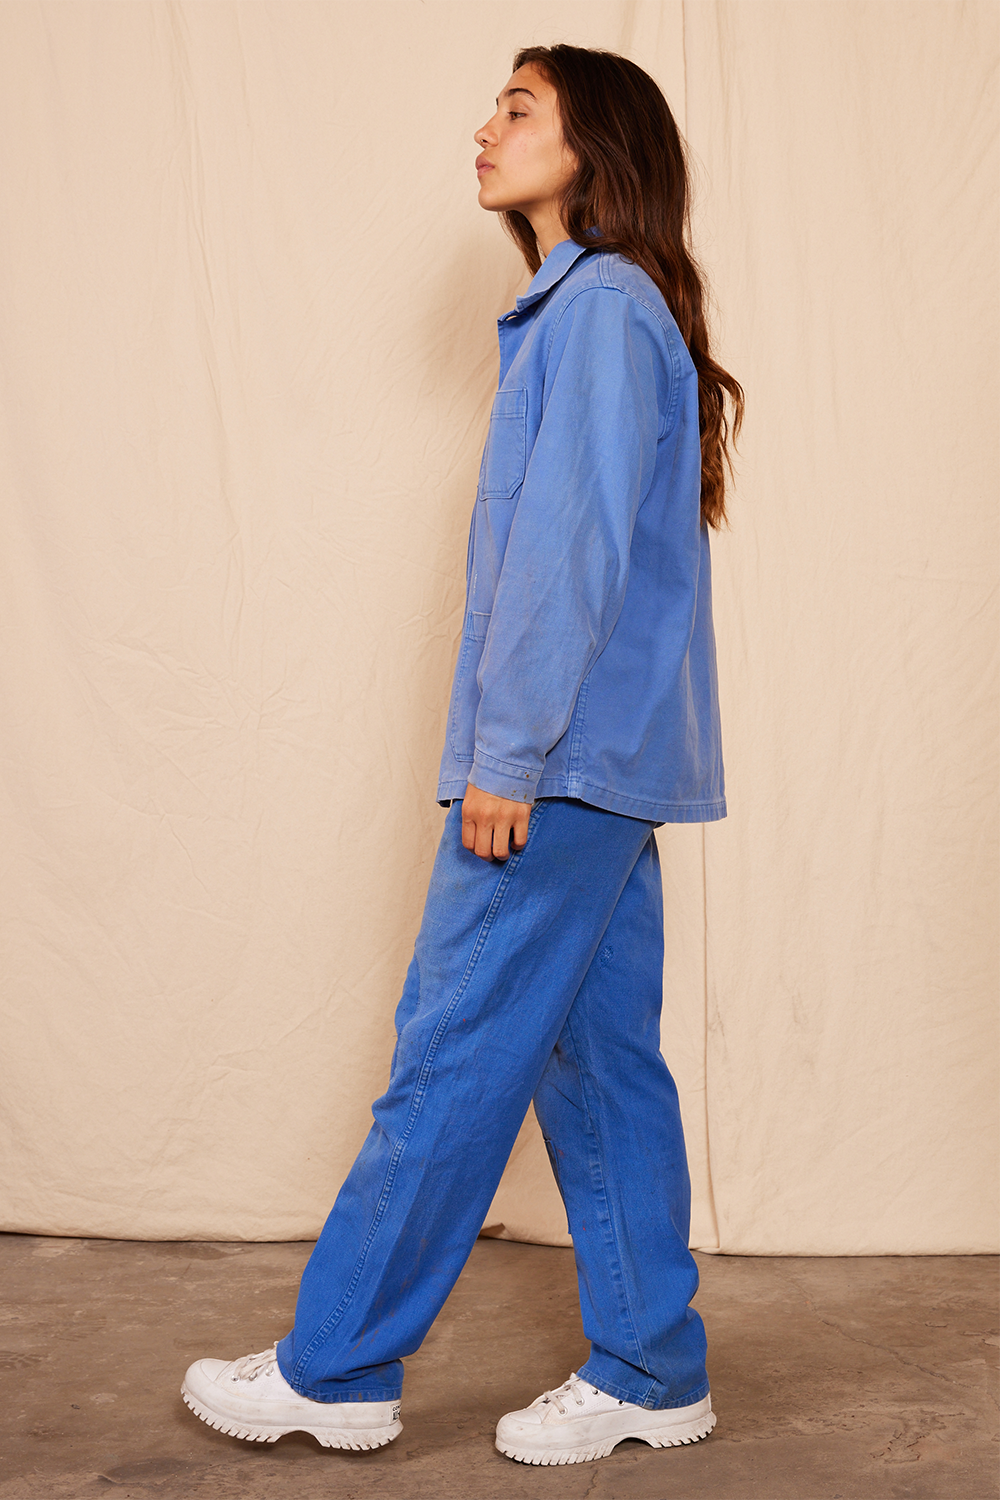 80's Reworked Vintage Euro Workwear Patched Pant